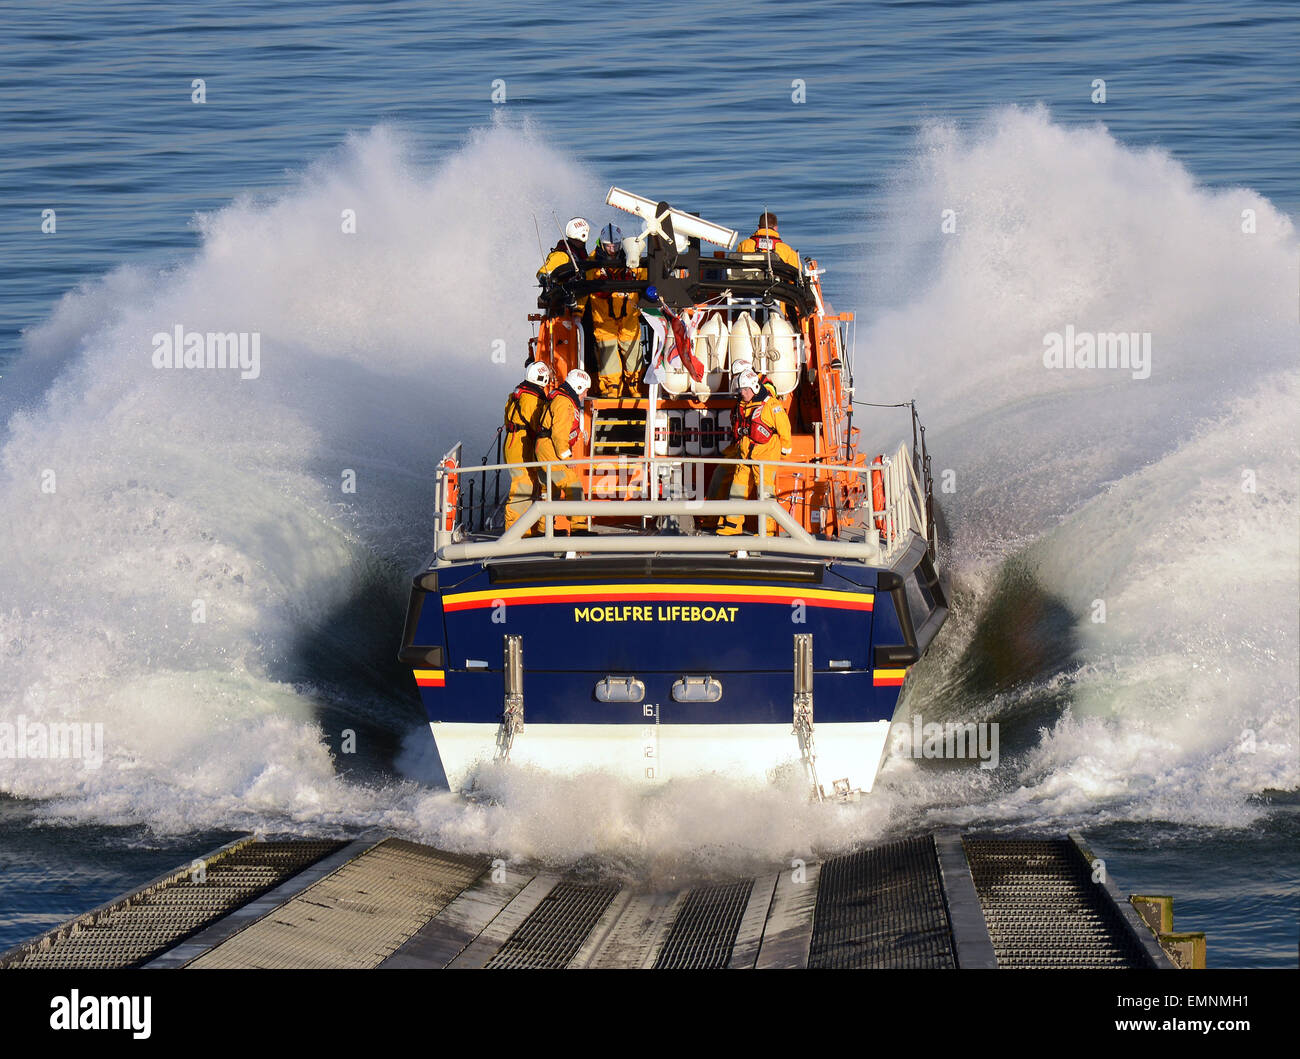 The Moelfre Lifeboat is launched as part of a crew training exercise in Moelfre on the Welsh island of Anglesey. Stock Photo